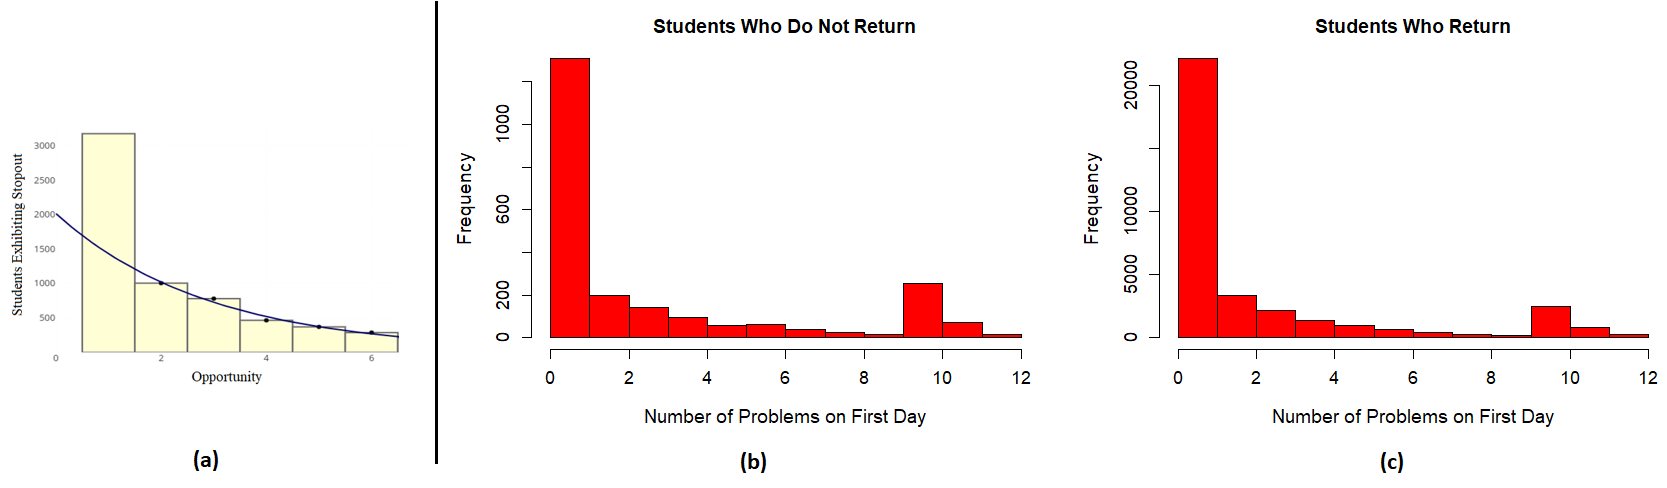 Three histograms comparing student stopout data: (a) the number of students who exhibit stopout on each problem of an assignment, (b) the number of students who stop out on the first day of an assignment and do not return, and (c) the number of students who stop out on the first day but ultimately return to complete the assignment.